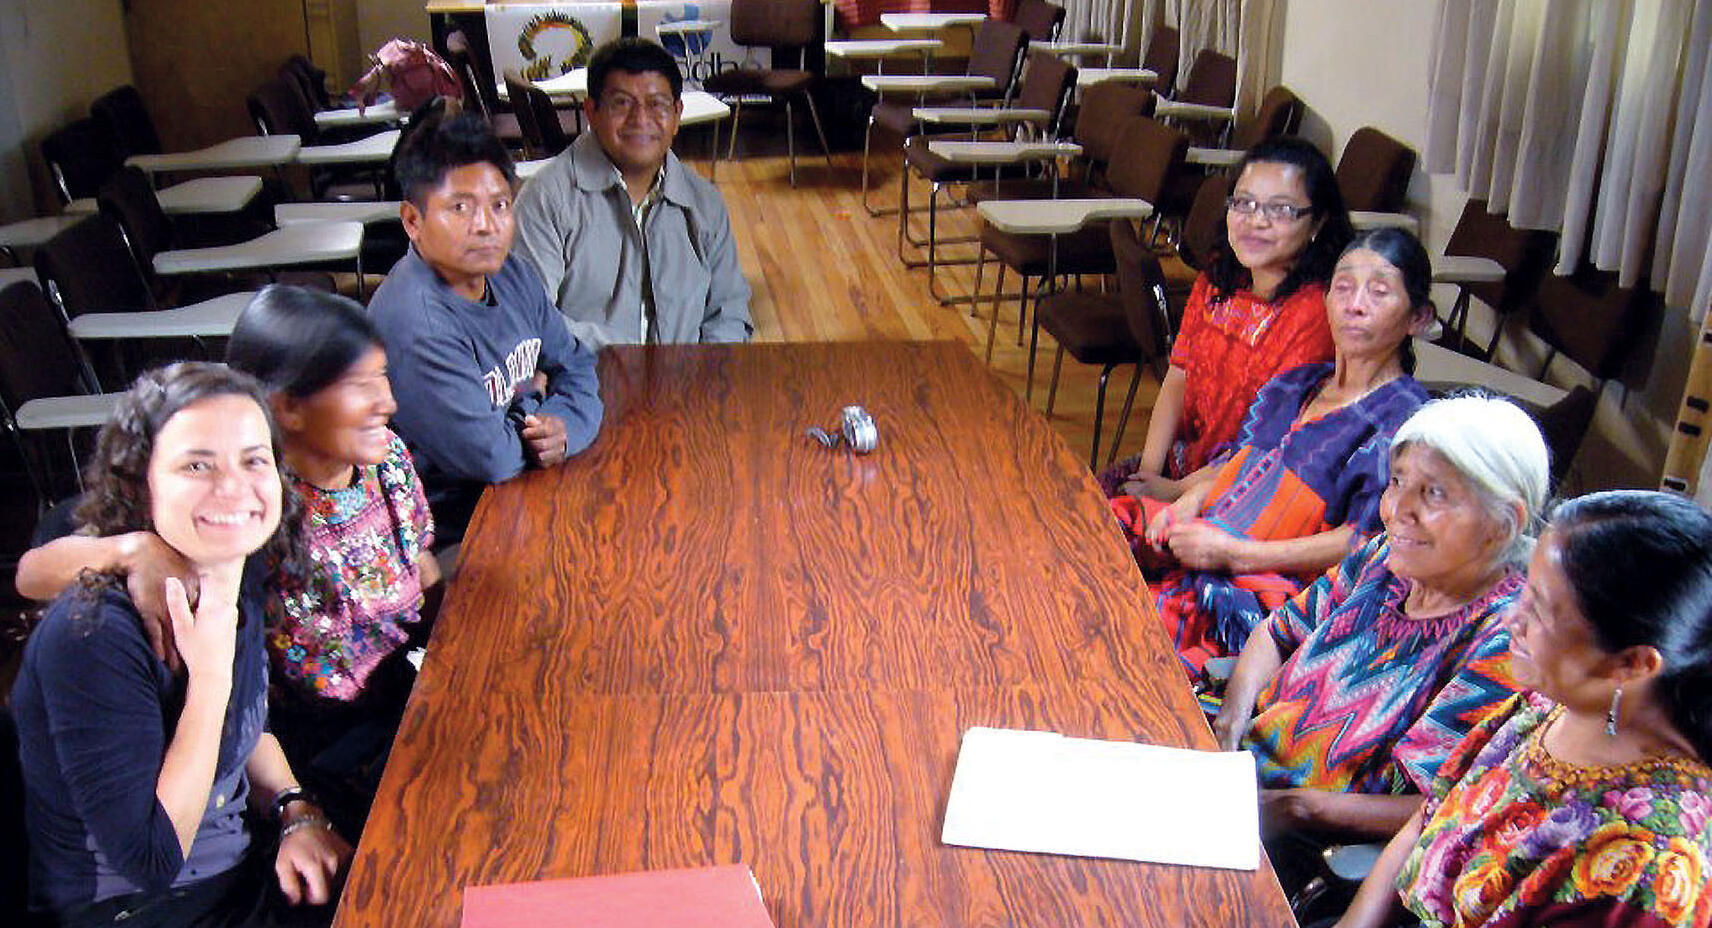 Almudena Bernabeu seated at a table with the Guatemalan witnesses who traveled to Spain to testify. (Photo courtesy of Pamela Yates.)